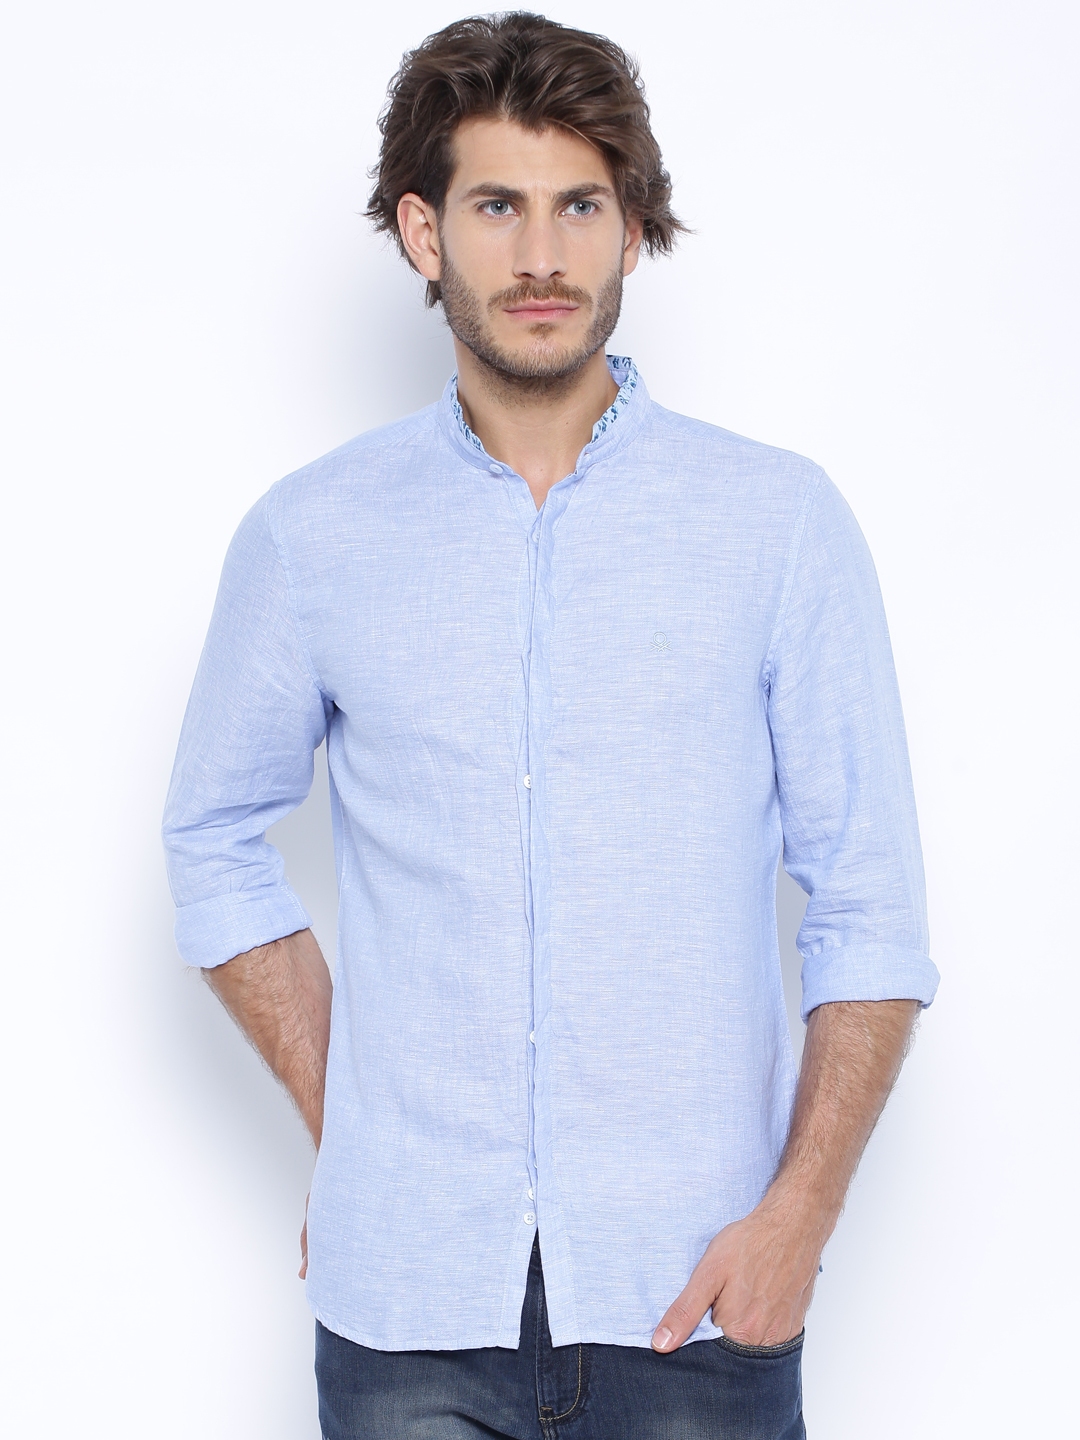 Buy United Colors Of Benetton Blue Linen Smart Casual Shirt - Shirts ...